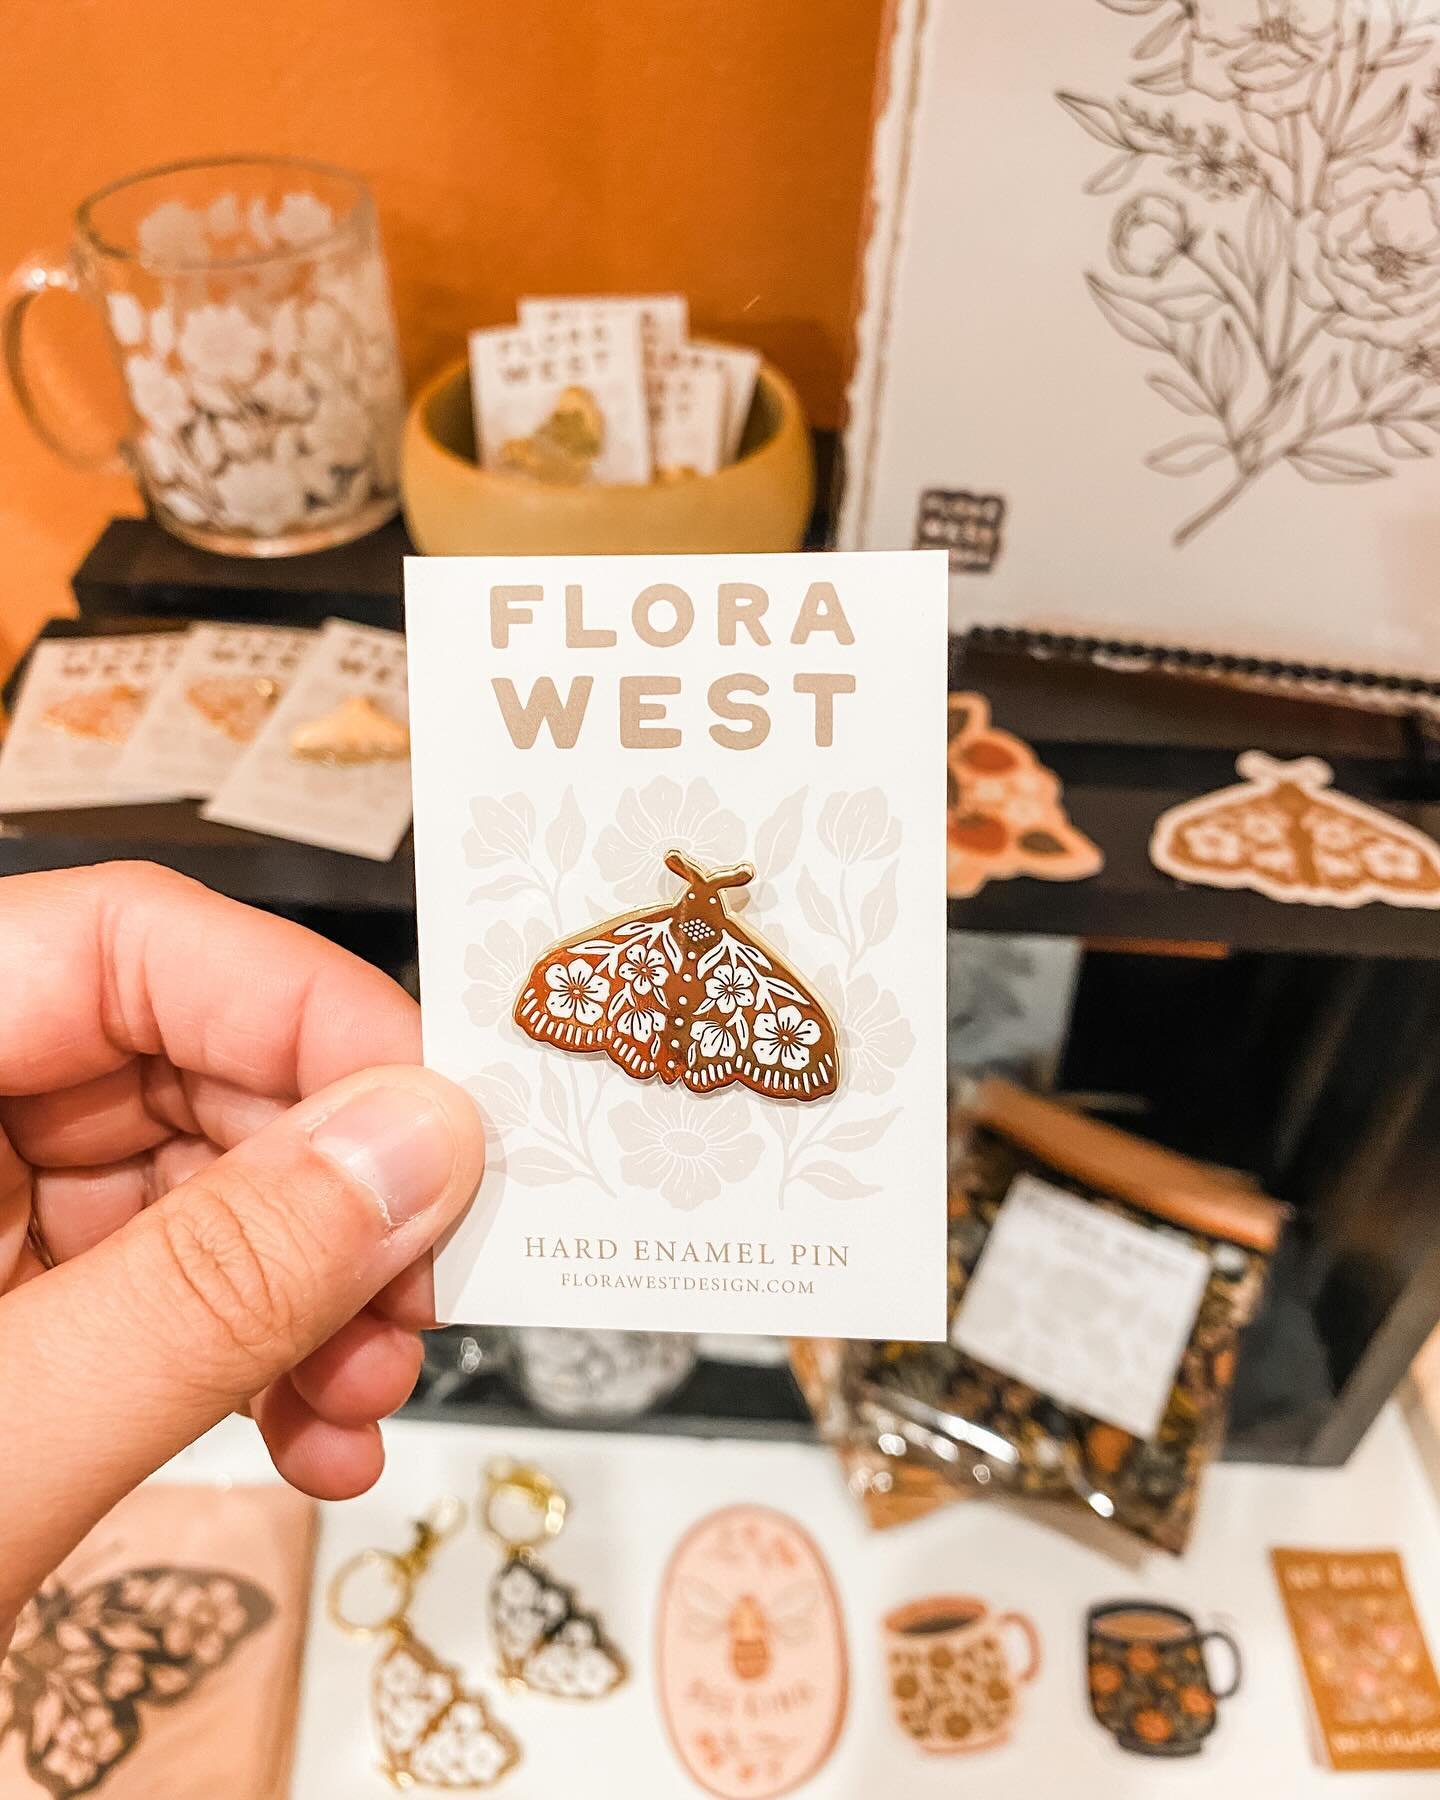 New artist alert! 🙌 We are thrilled to welcome Laura Hatfield of @florawestdesign to the shop! We fell in love with her block print illustrations and absolutely stunning silk scarves. We also have a selection of her stickers, enamel pins, keychains,